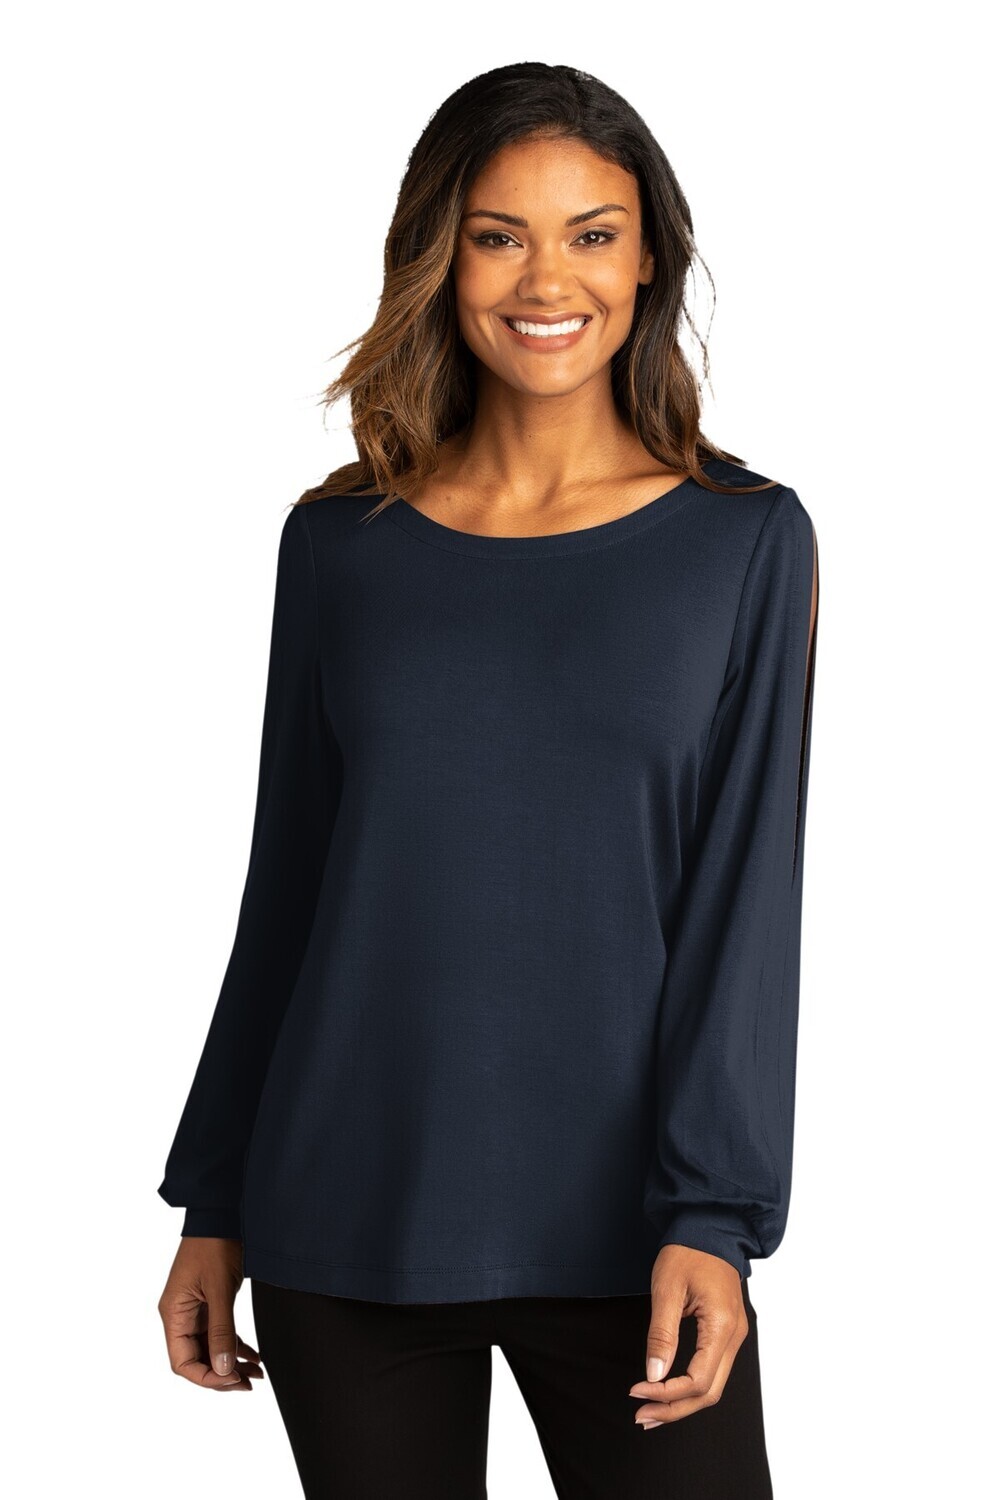 PORT AUTHORITY LADIES LUXE KNIT TOP (LK5600) RIVER NAVY BLUE - 4XL